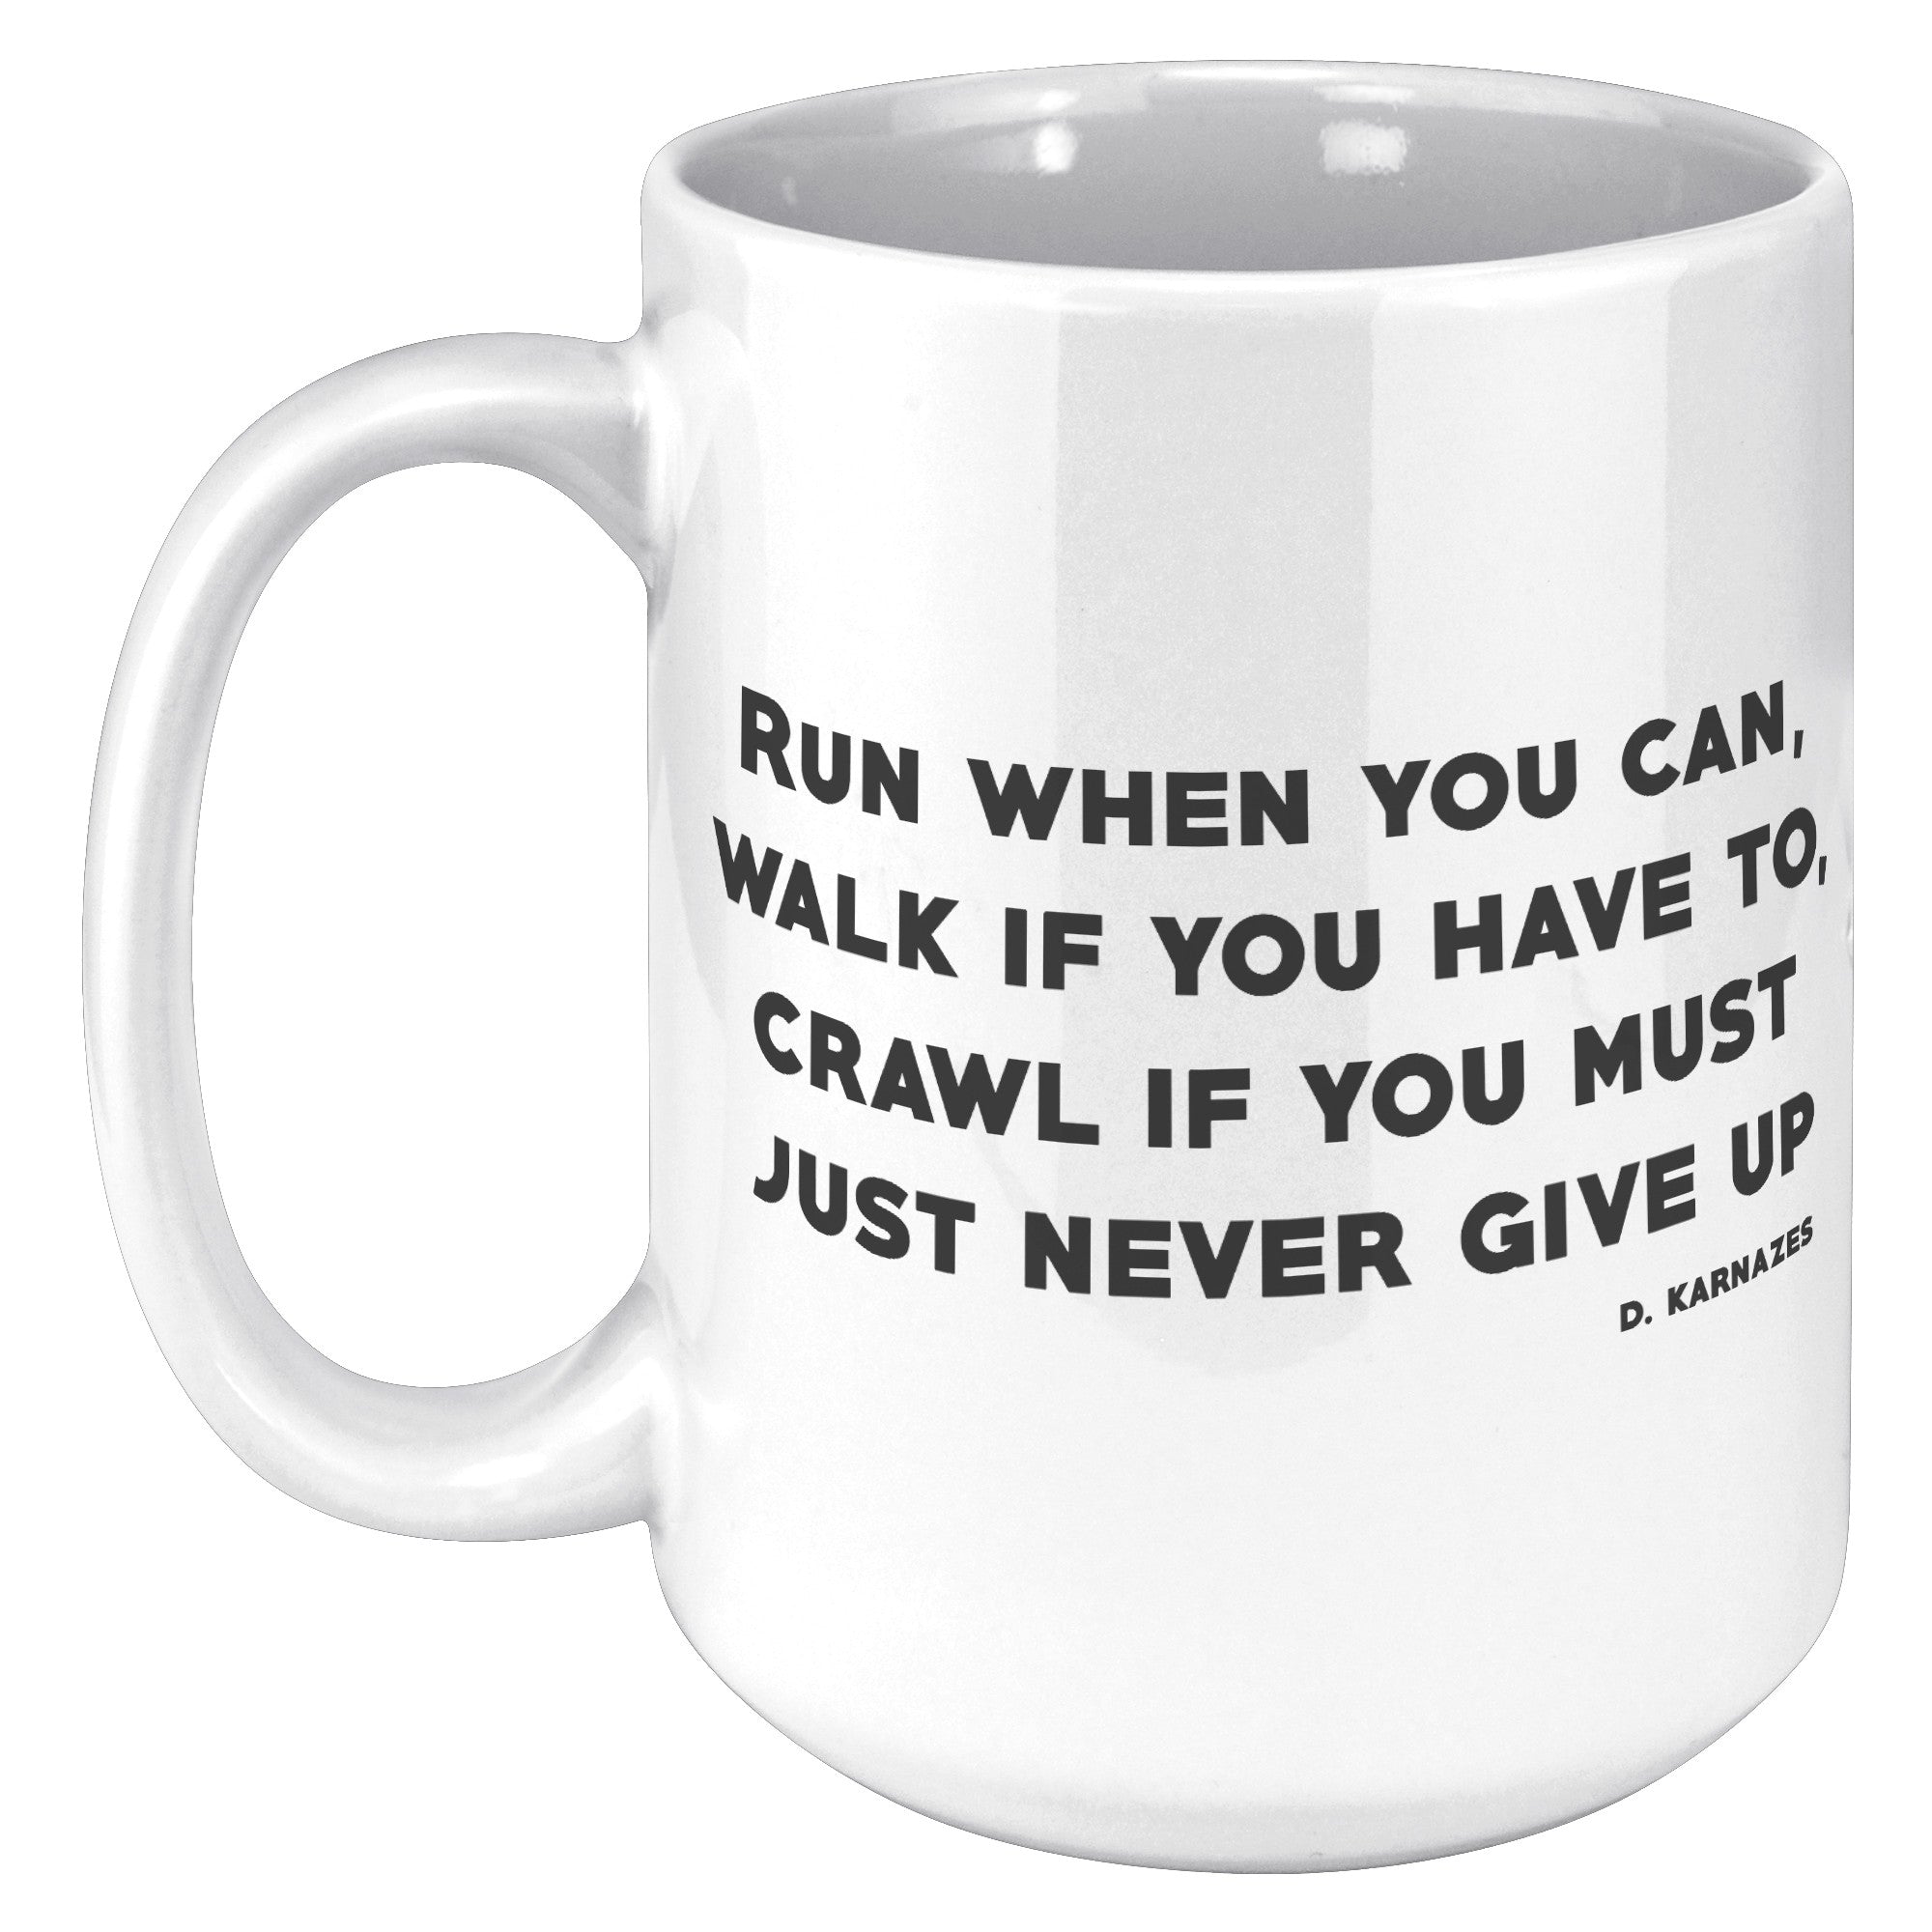 Male Runner Inspirational Mug - Motivational Running Quotes Cup - Perfect Gift for Marathon Men - Runner's Daily Dose of Determination - D1